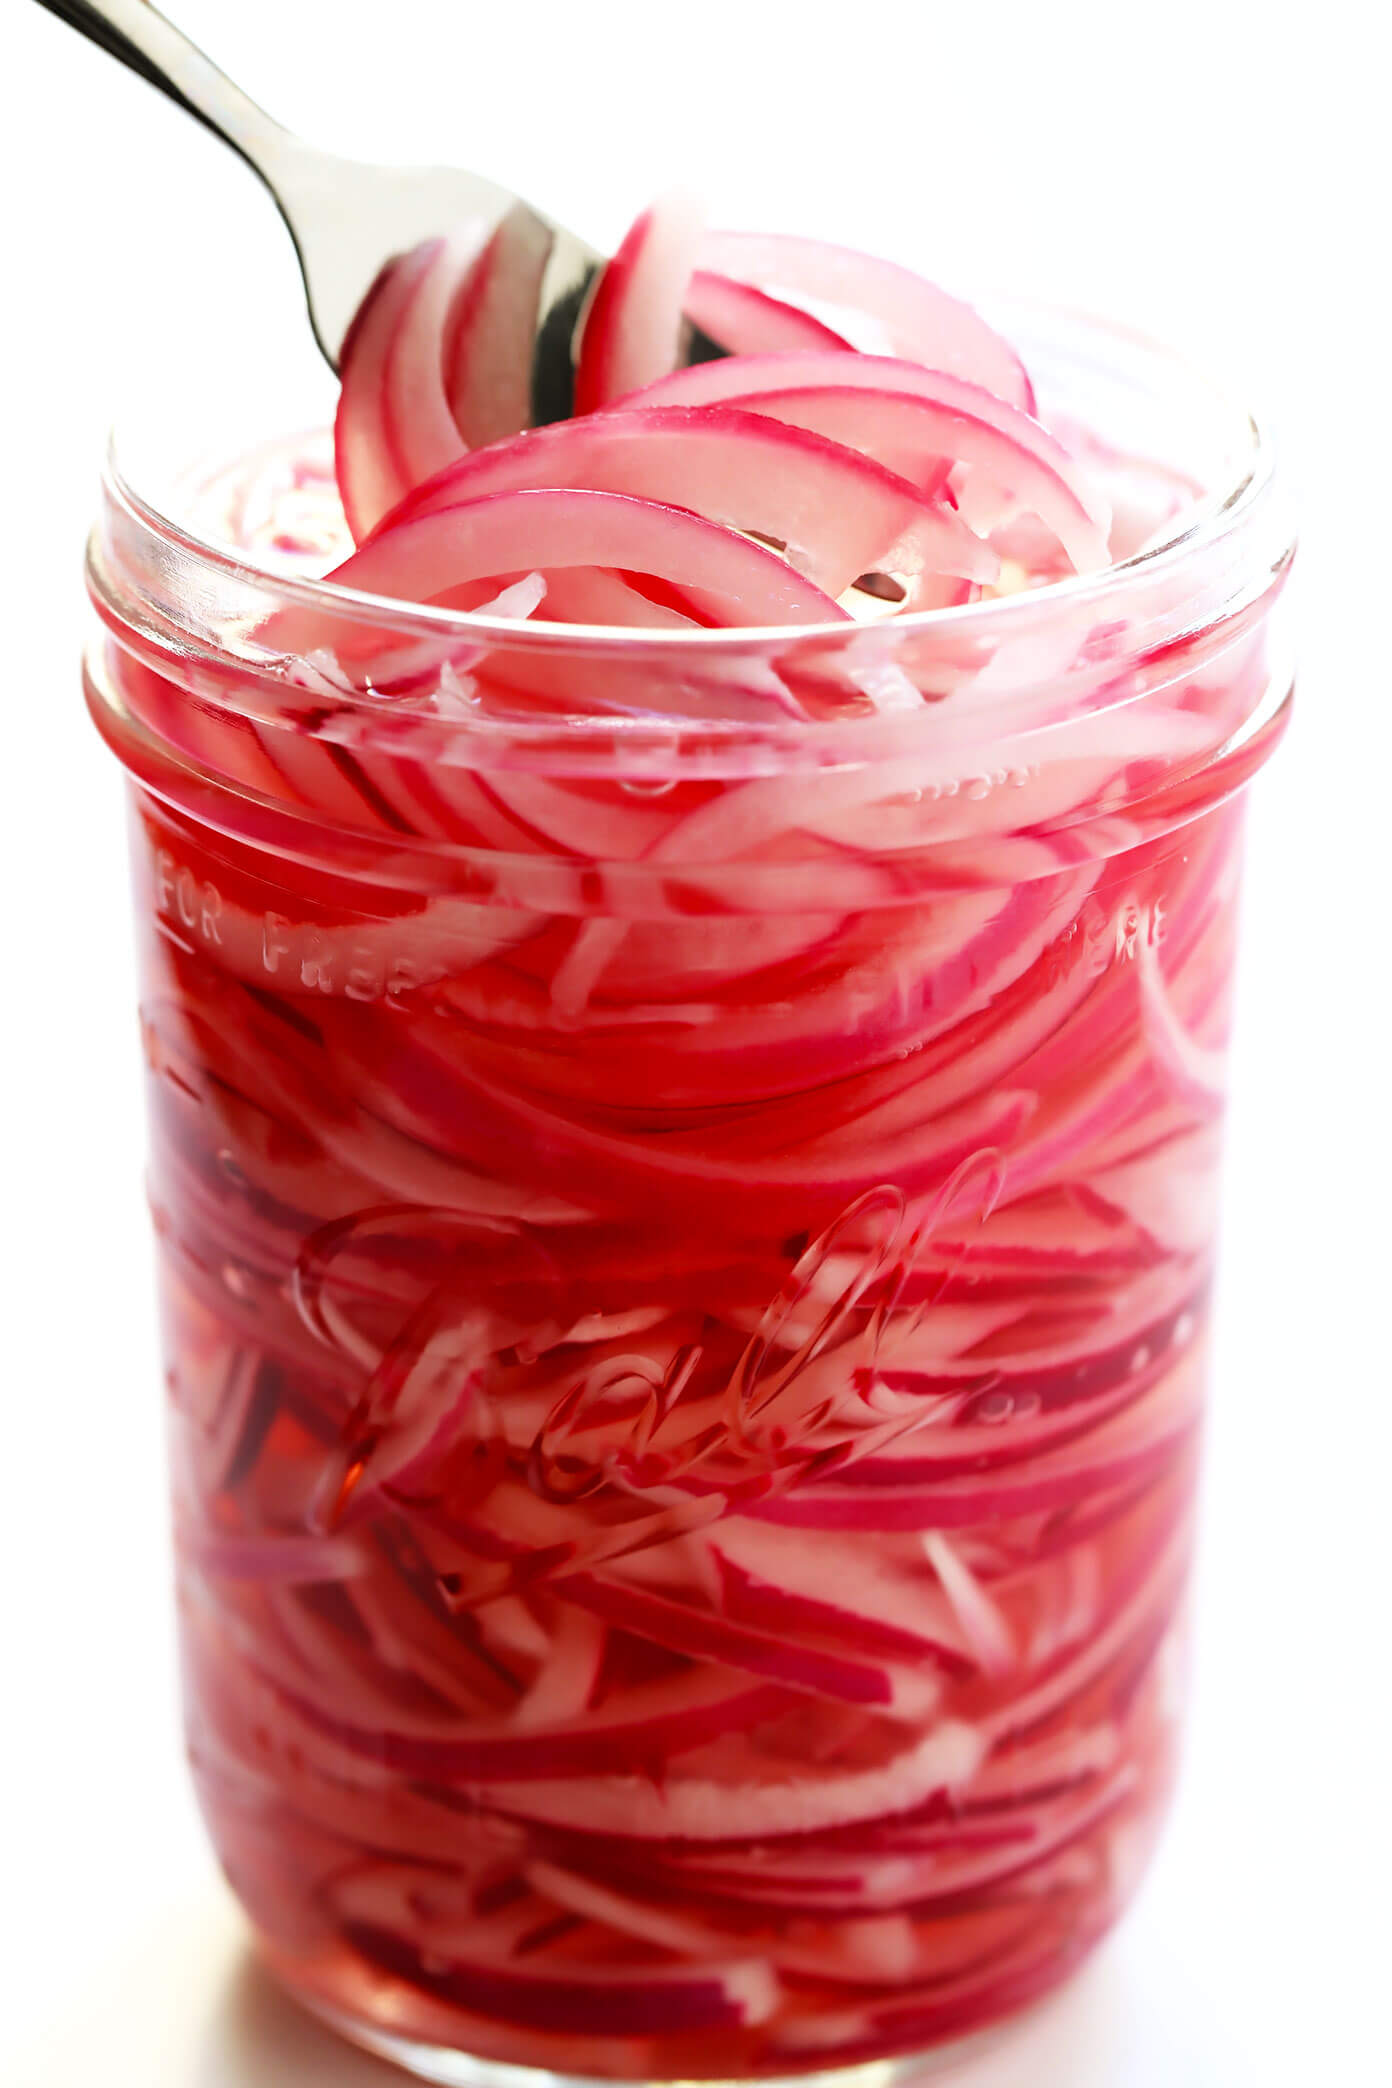 https://www.gimmesomeoven.com/wp-content/uploads/2019/08/How-To-Make-Pickled-Red-Onions-Recipe-4.jpg